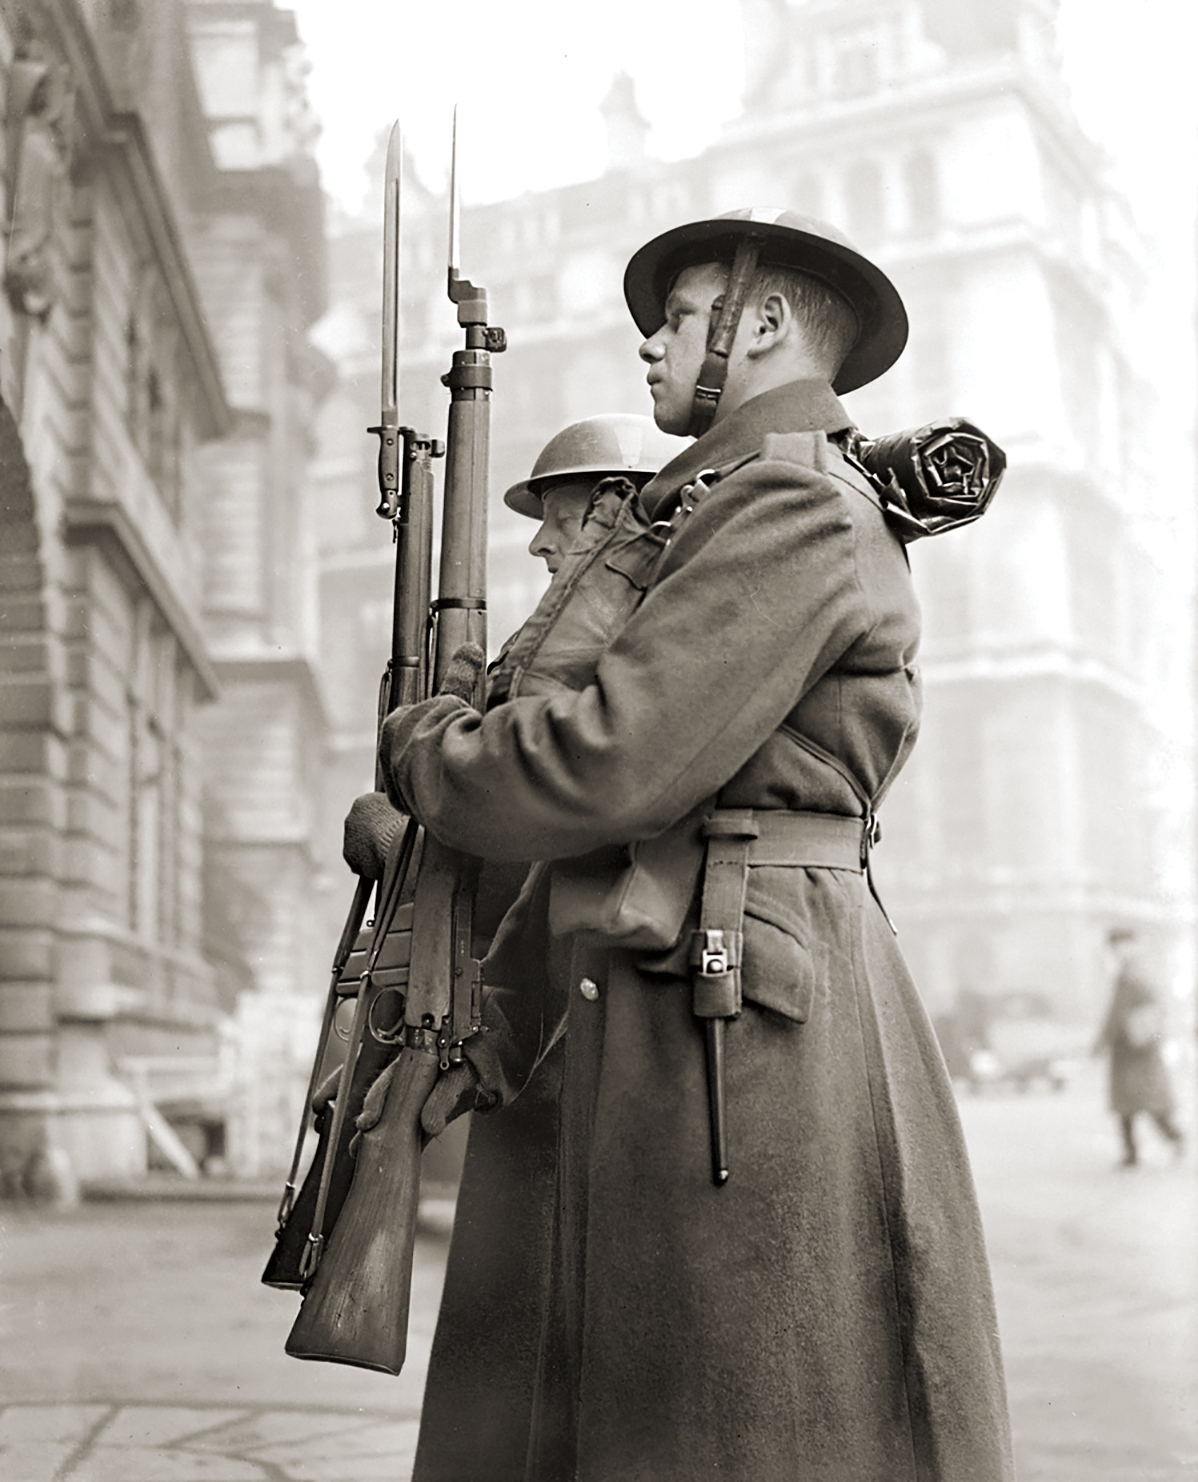 The Lee-Enfield Put a SMLE on Tommies' Faces and Fear in the Germans Hearts